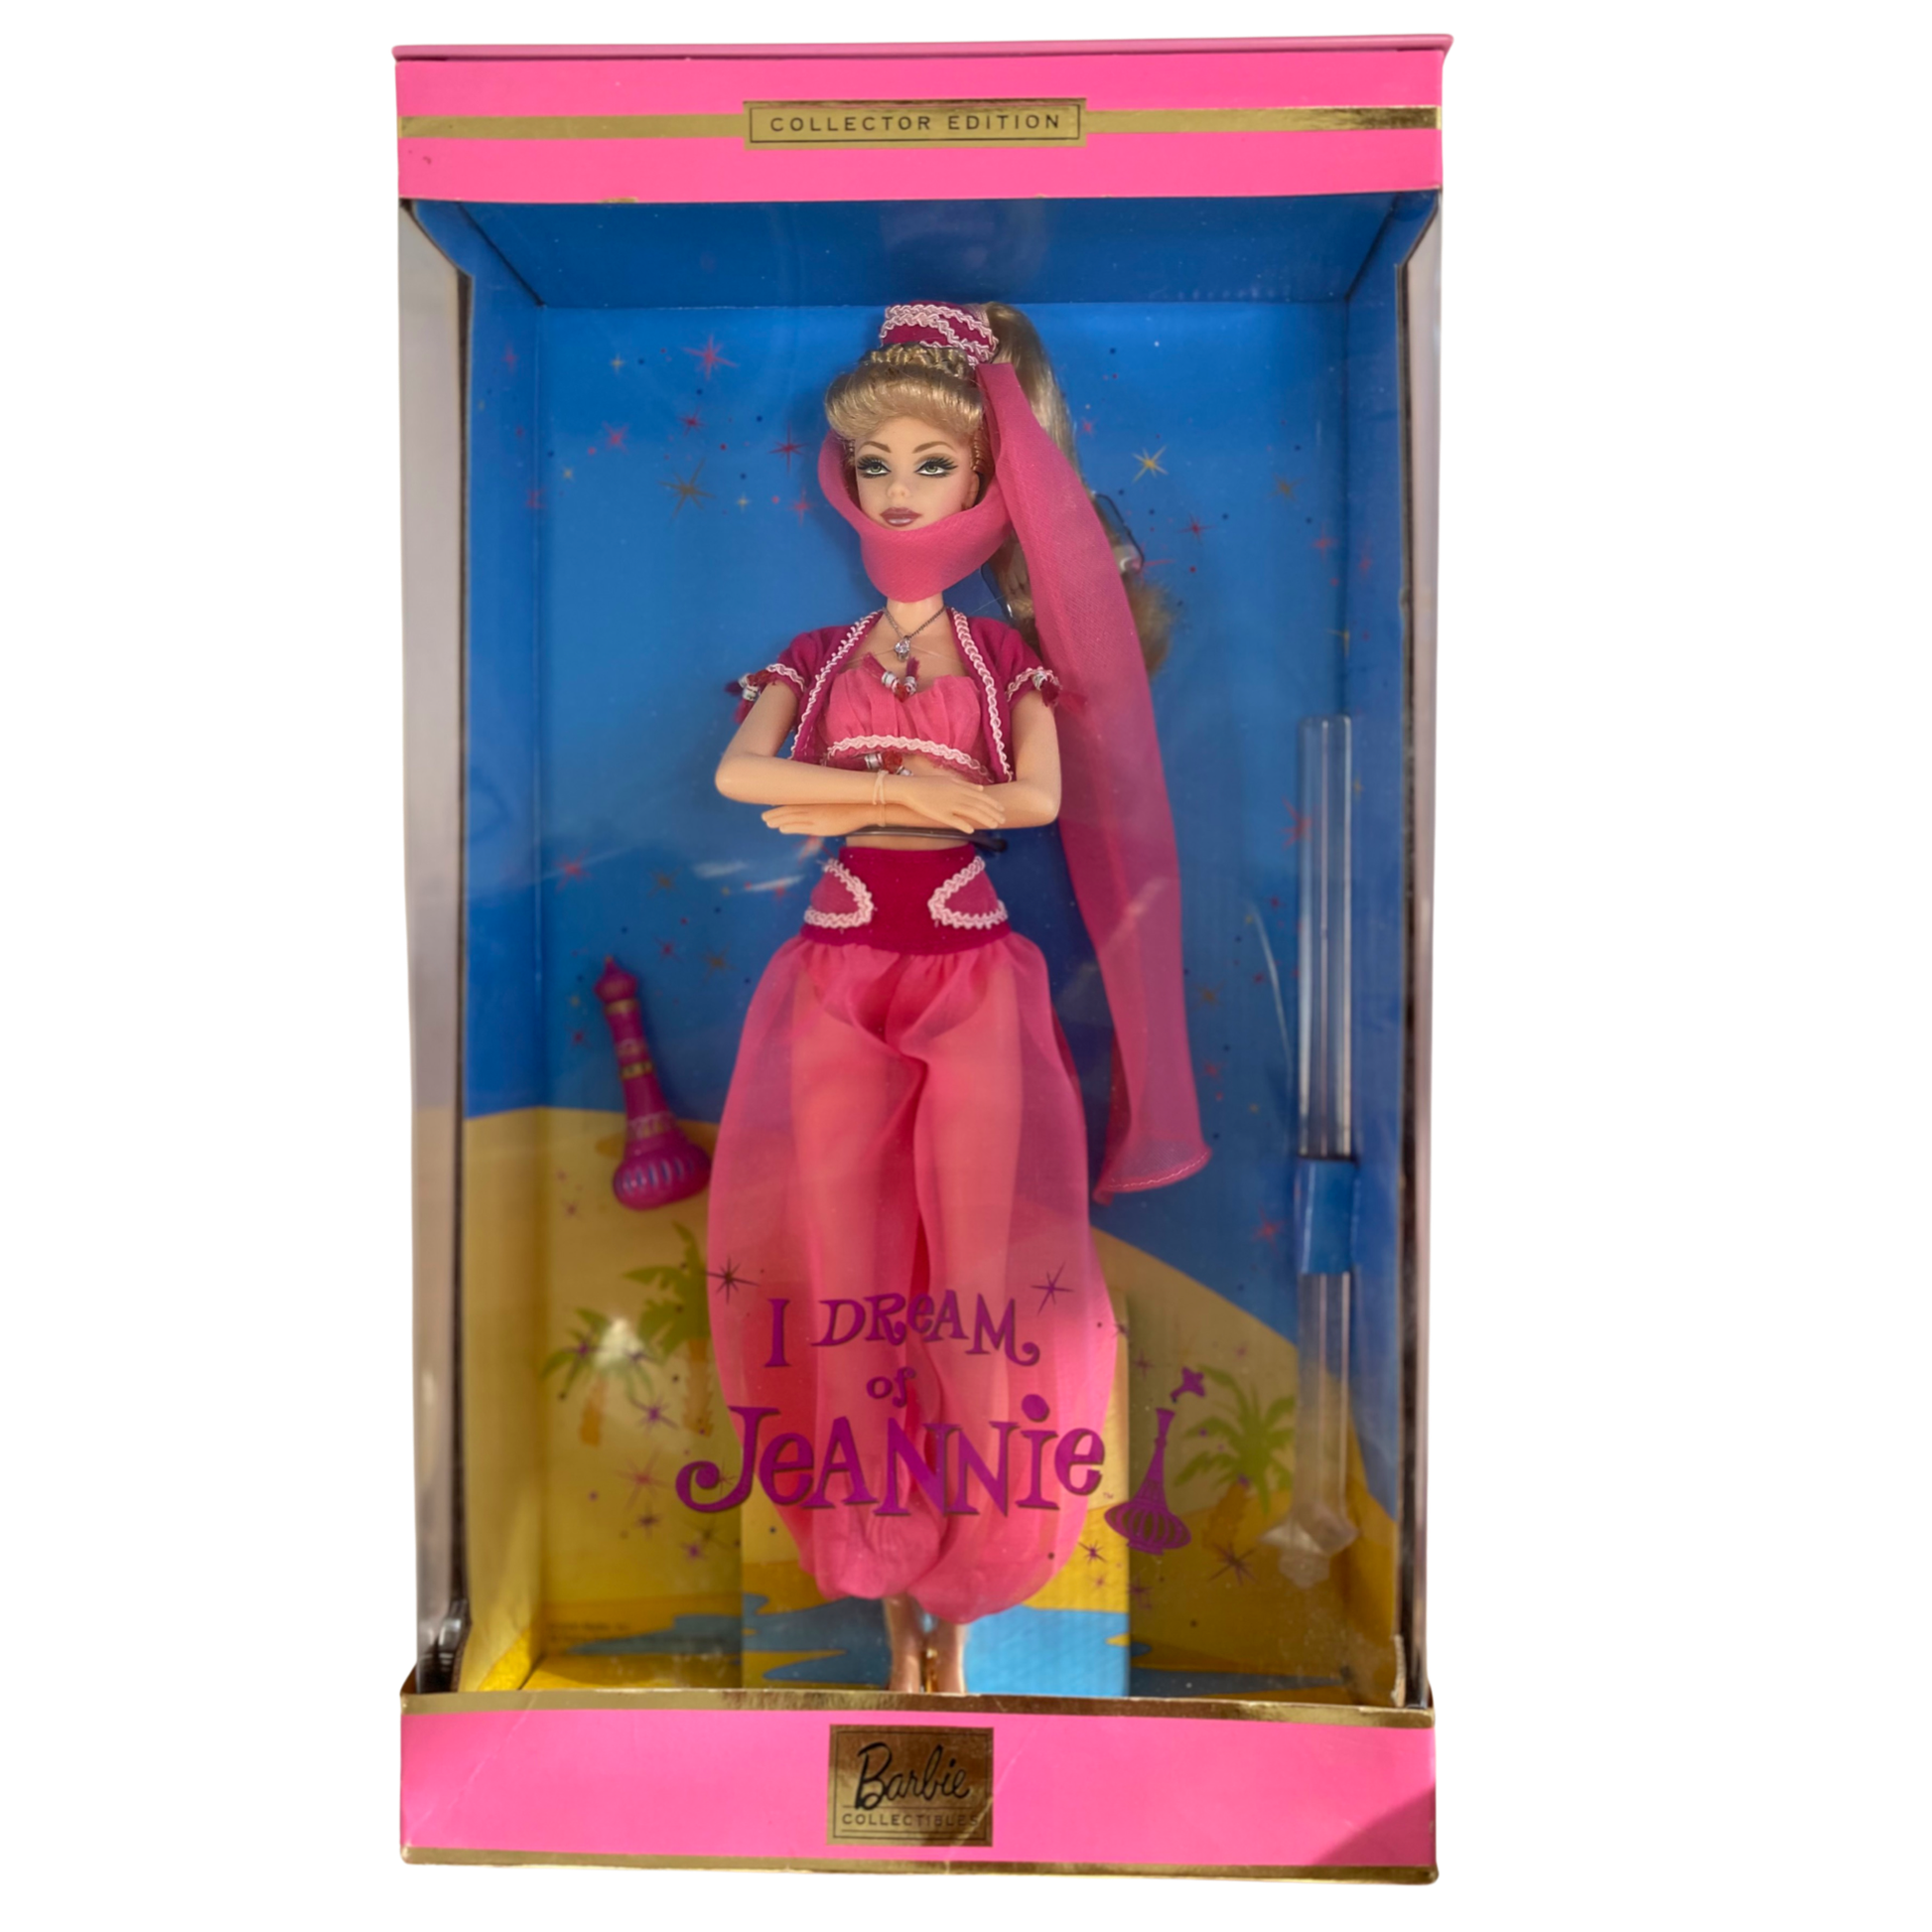 I dream of Jeannie Barbie Collector Edition in Excellent Condition